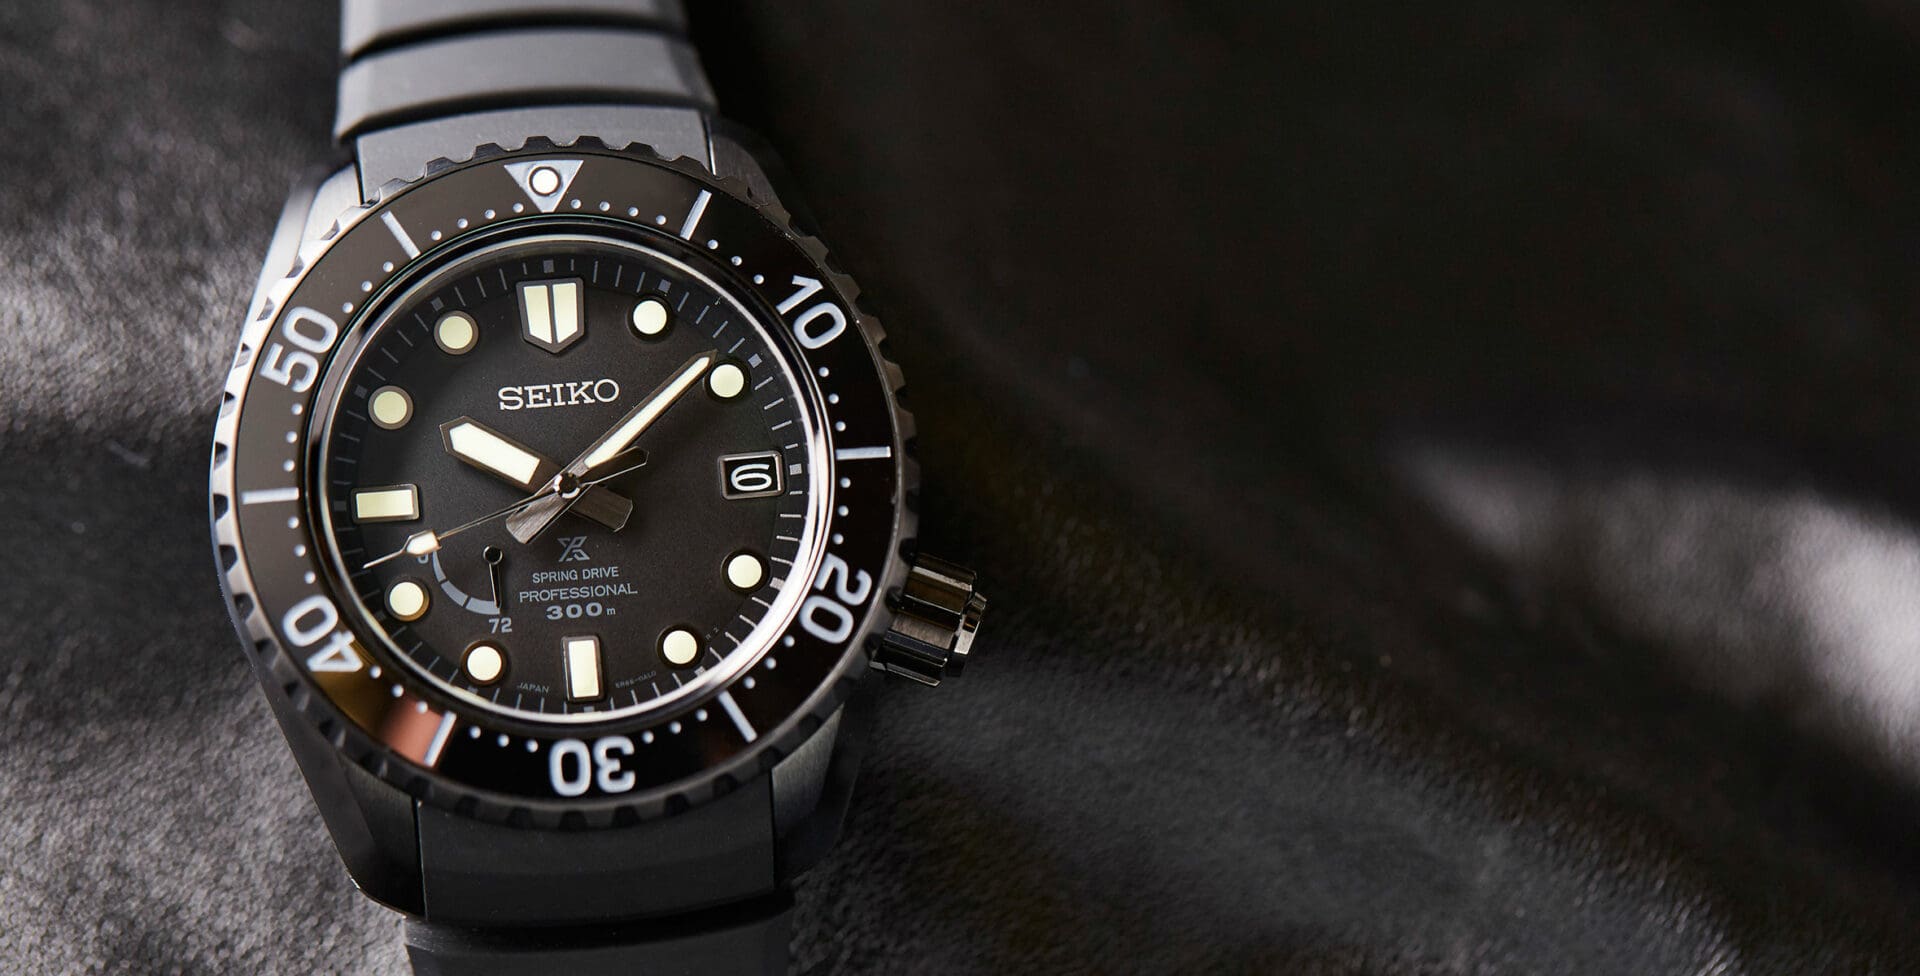 VIDEO: Seiko has just announced the Prospex LX collection – these are ...